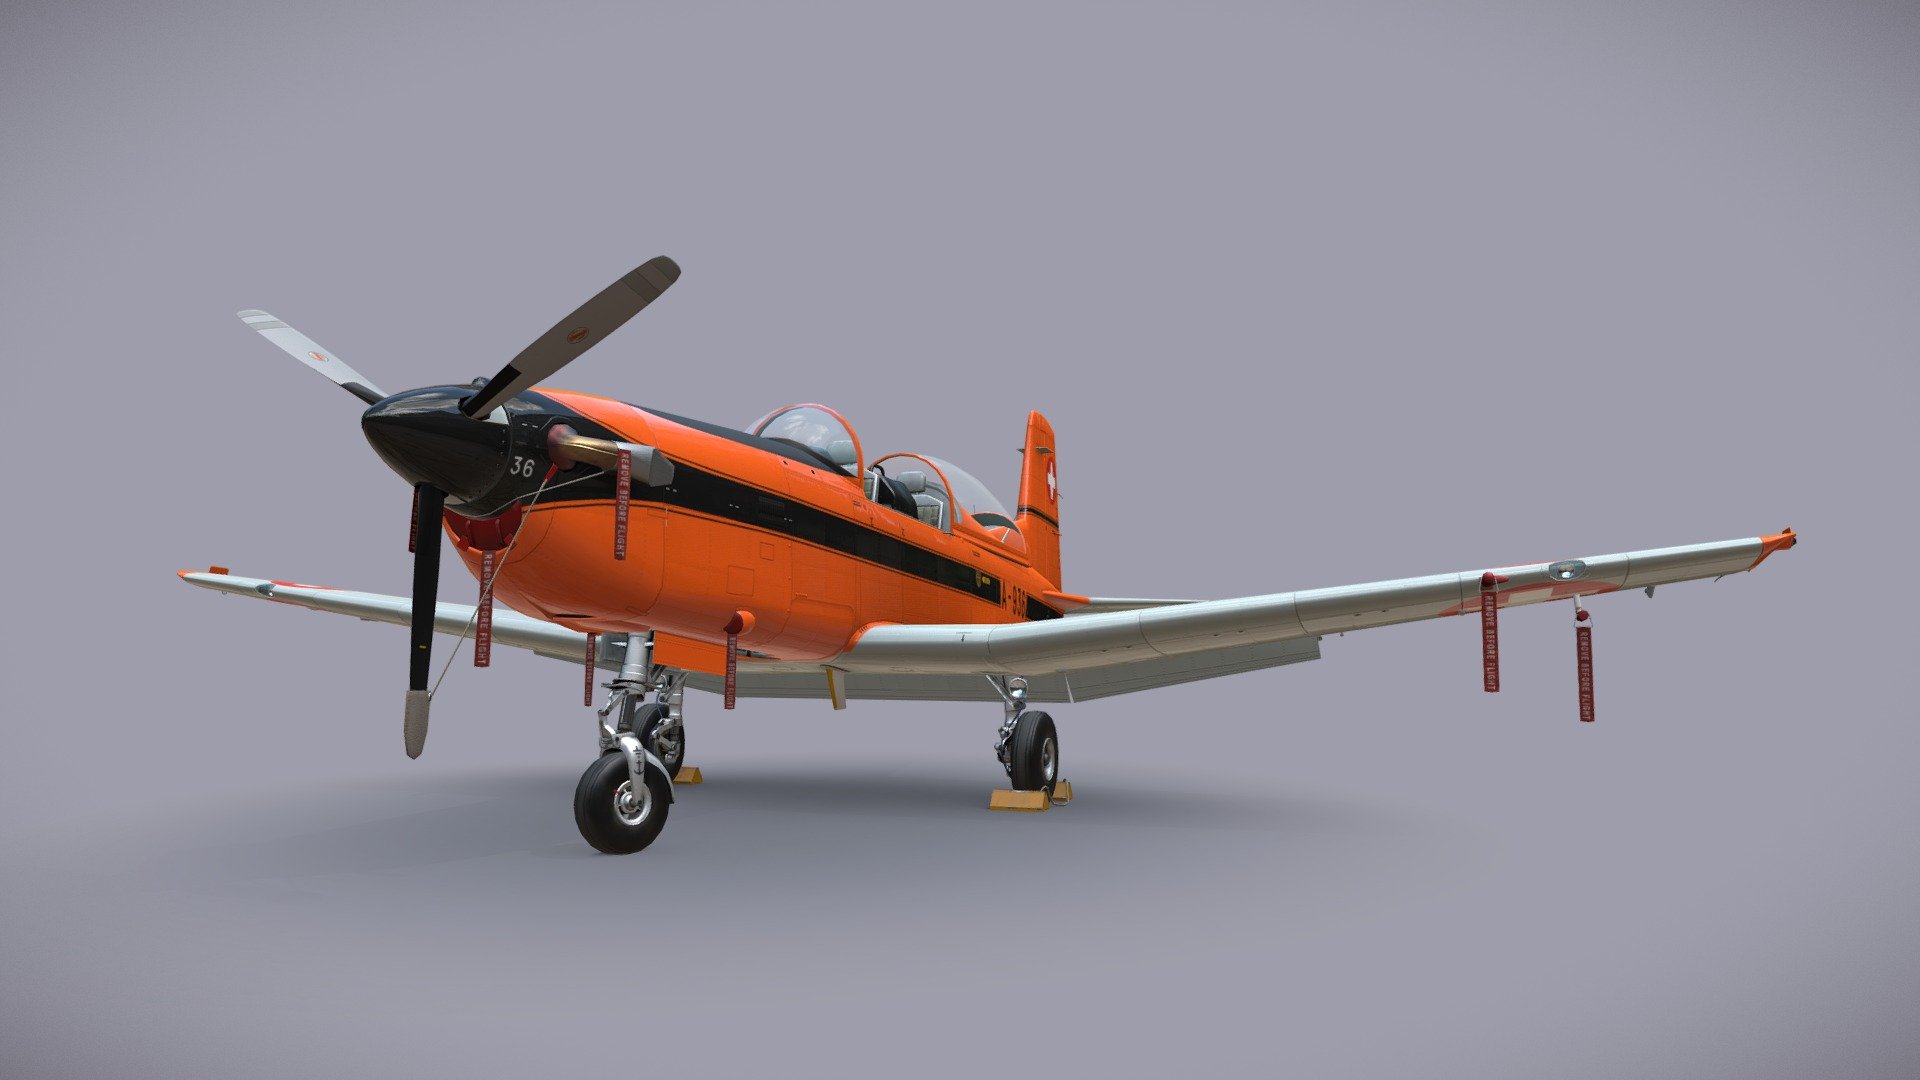 Low-poly 3D model airplane (Pilatus PC-7 Mk-I) with LODs 




Linked/Rigged (pivots apart) and animated 

Textures for PBR shader (Albedo, Specular, Gloss, AmbietOcclusion, NormalMap, Emissive, Opasity) size 4096x4096 

Сontains 6 LODs

Parking сovers

animation: - CANOPY (0 freme - open, 100 frame - close) - PROP (0-100 frame - one rotation) - GEAR (0 frame - down, 100 frame - up) + Shape animation for brake hoses - GEAR_STOCK (0 frame - max. up, 100 frame - max. down) + Shape animation for brake hoses - GEAR_STEER (0 frame - max. left, 100 frame - max. right) - WHEEL (0-100 frame - one rotation) - AILERONS (0 frame - max. left, 100 frame - max. right, 50 frame - neutral) - RUDDER (0 frame - max. left, 100 frame - max. right, 50 frame - neutral) - ELEVATOR (0 frame - max. dowm, 100 frame - max. up, 50 frame - neutral) - FLAPS (0 frame - up, 100 frame - max. down)

If you have questions about my models or need any kind of help, feel free to contact me and i’ll do my best to help you 3d model